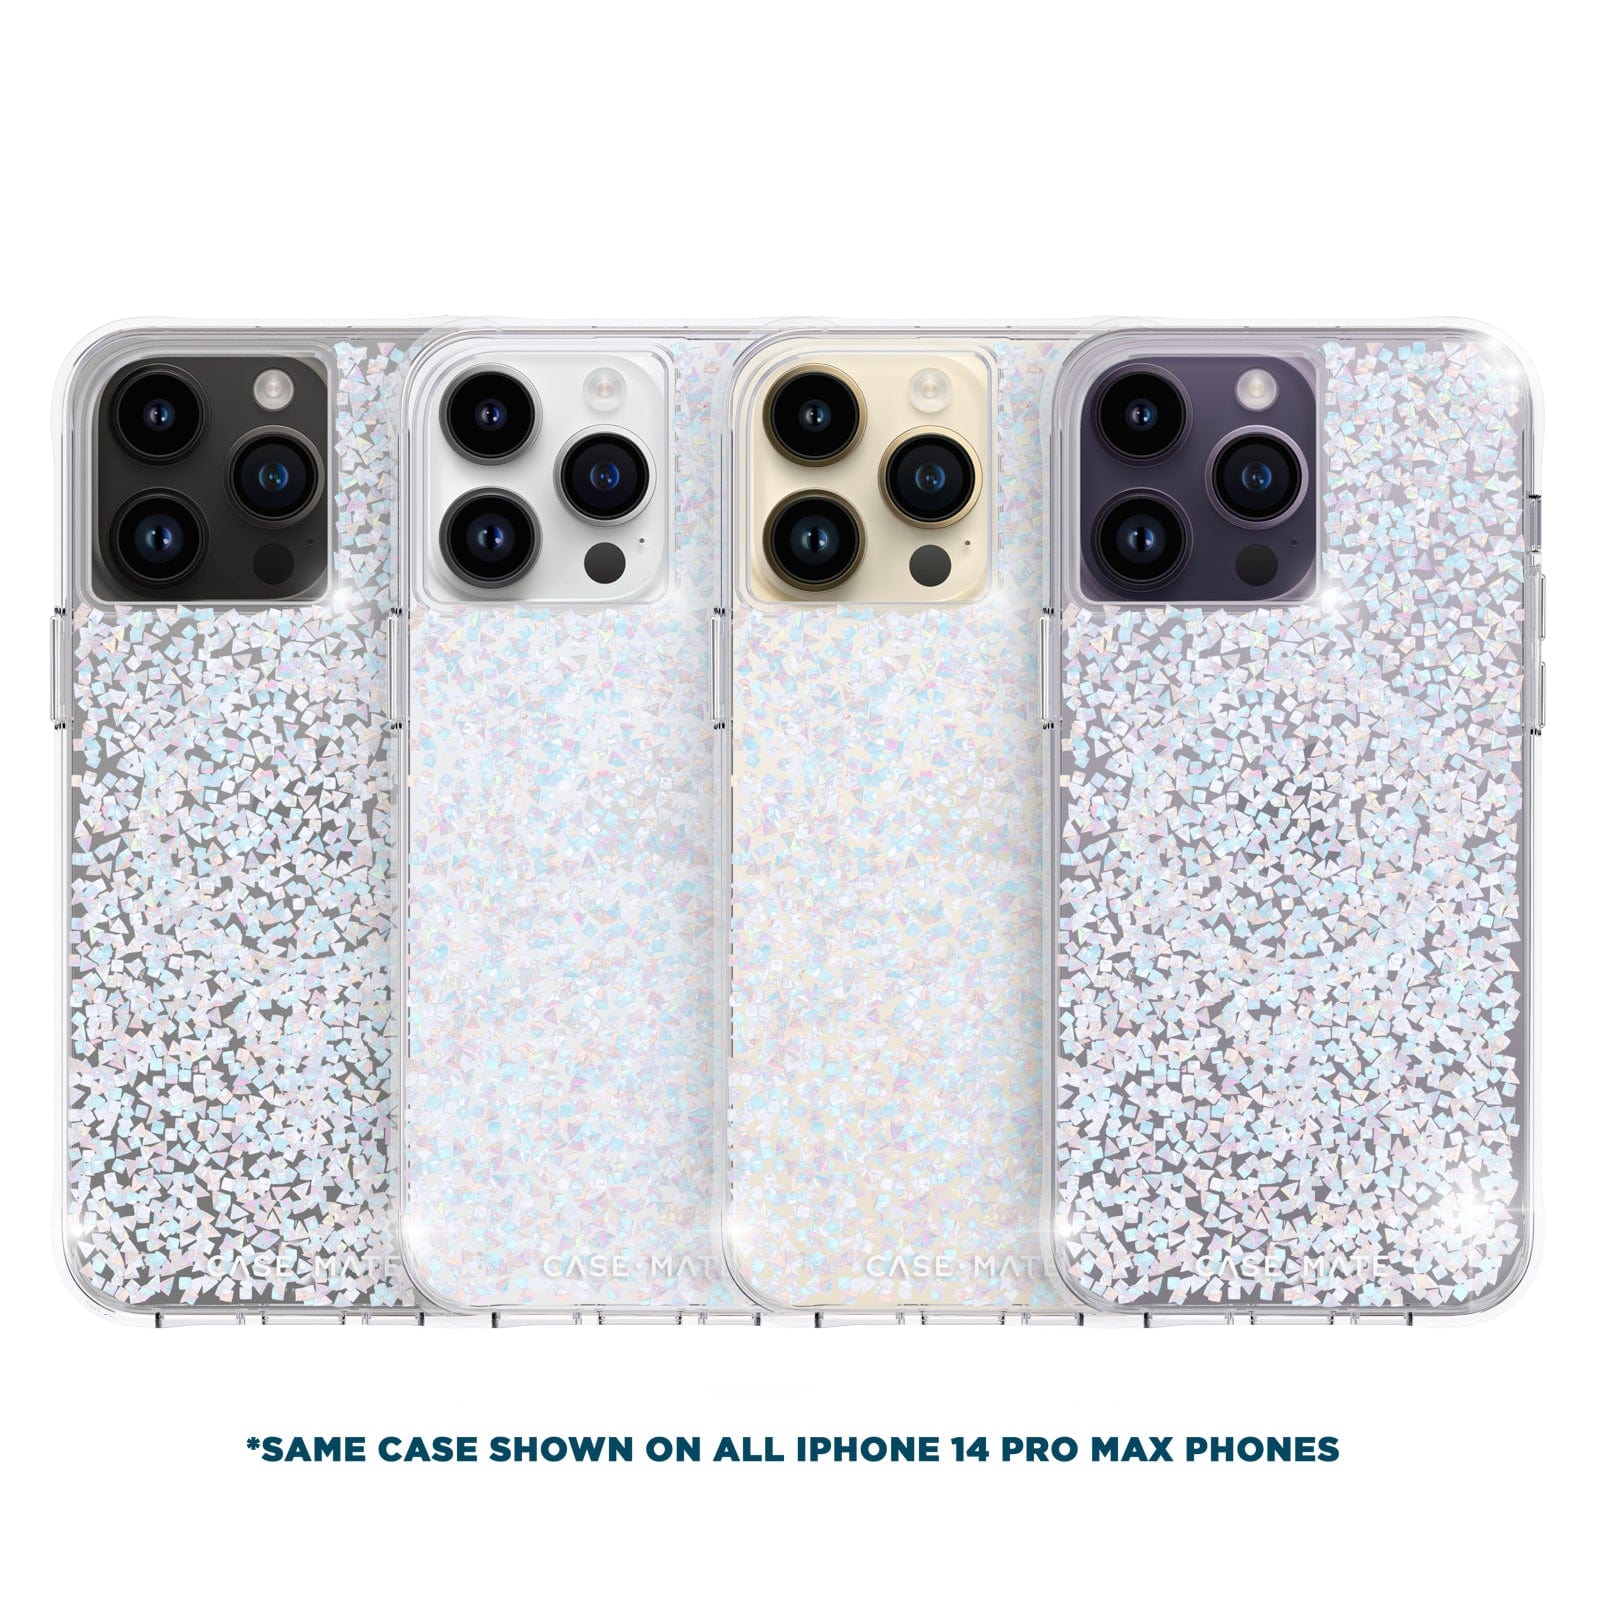 *SAME CASE SHOWN ON ALL IPHONE 14 PRO MAX PHONES